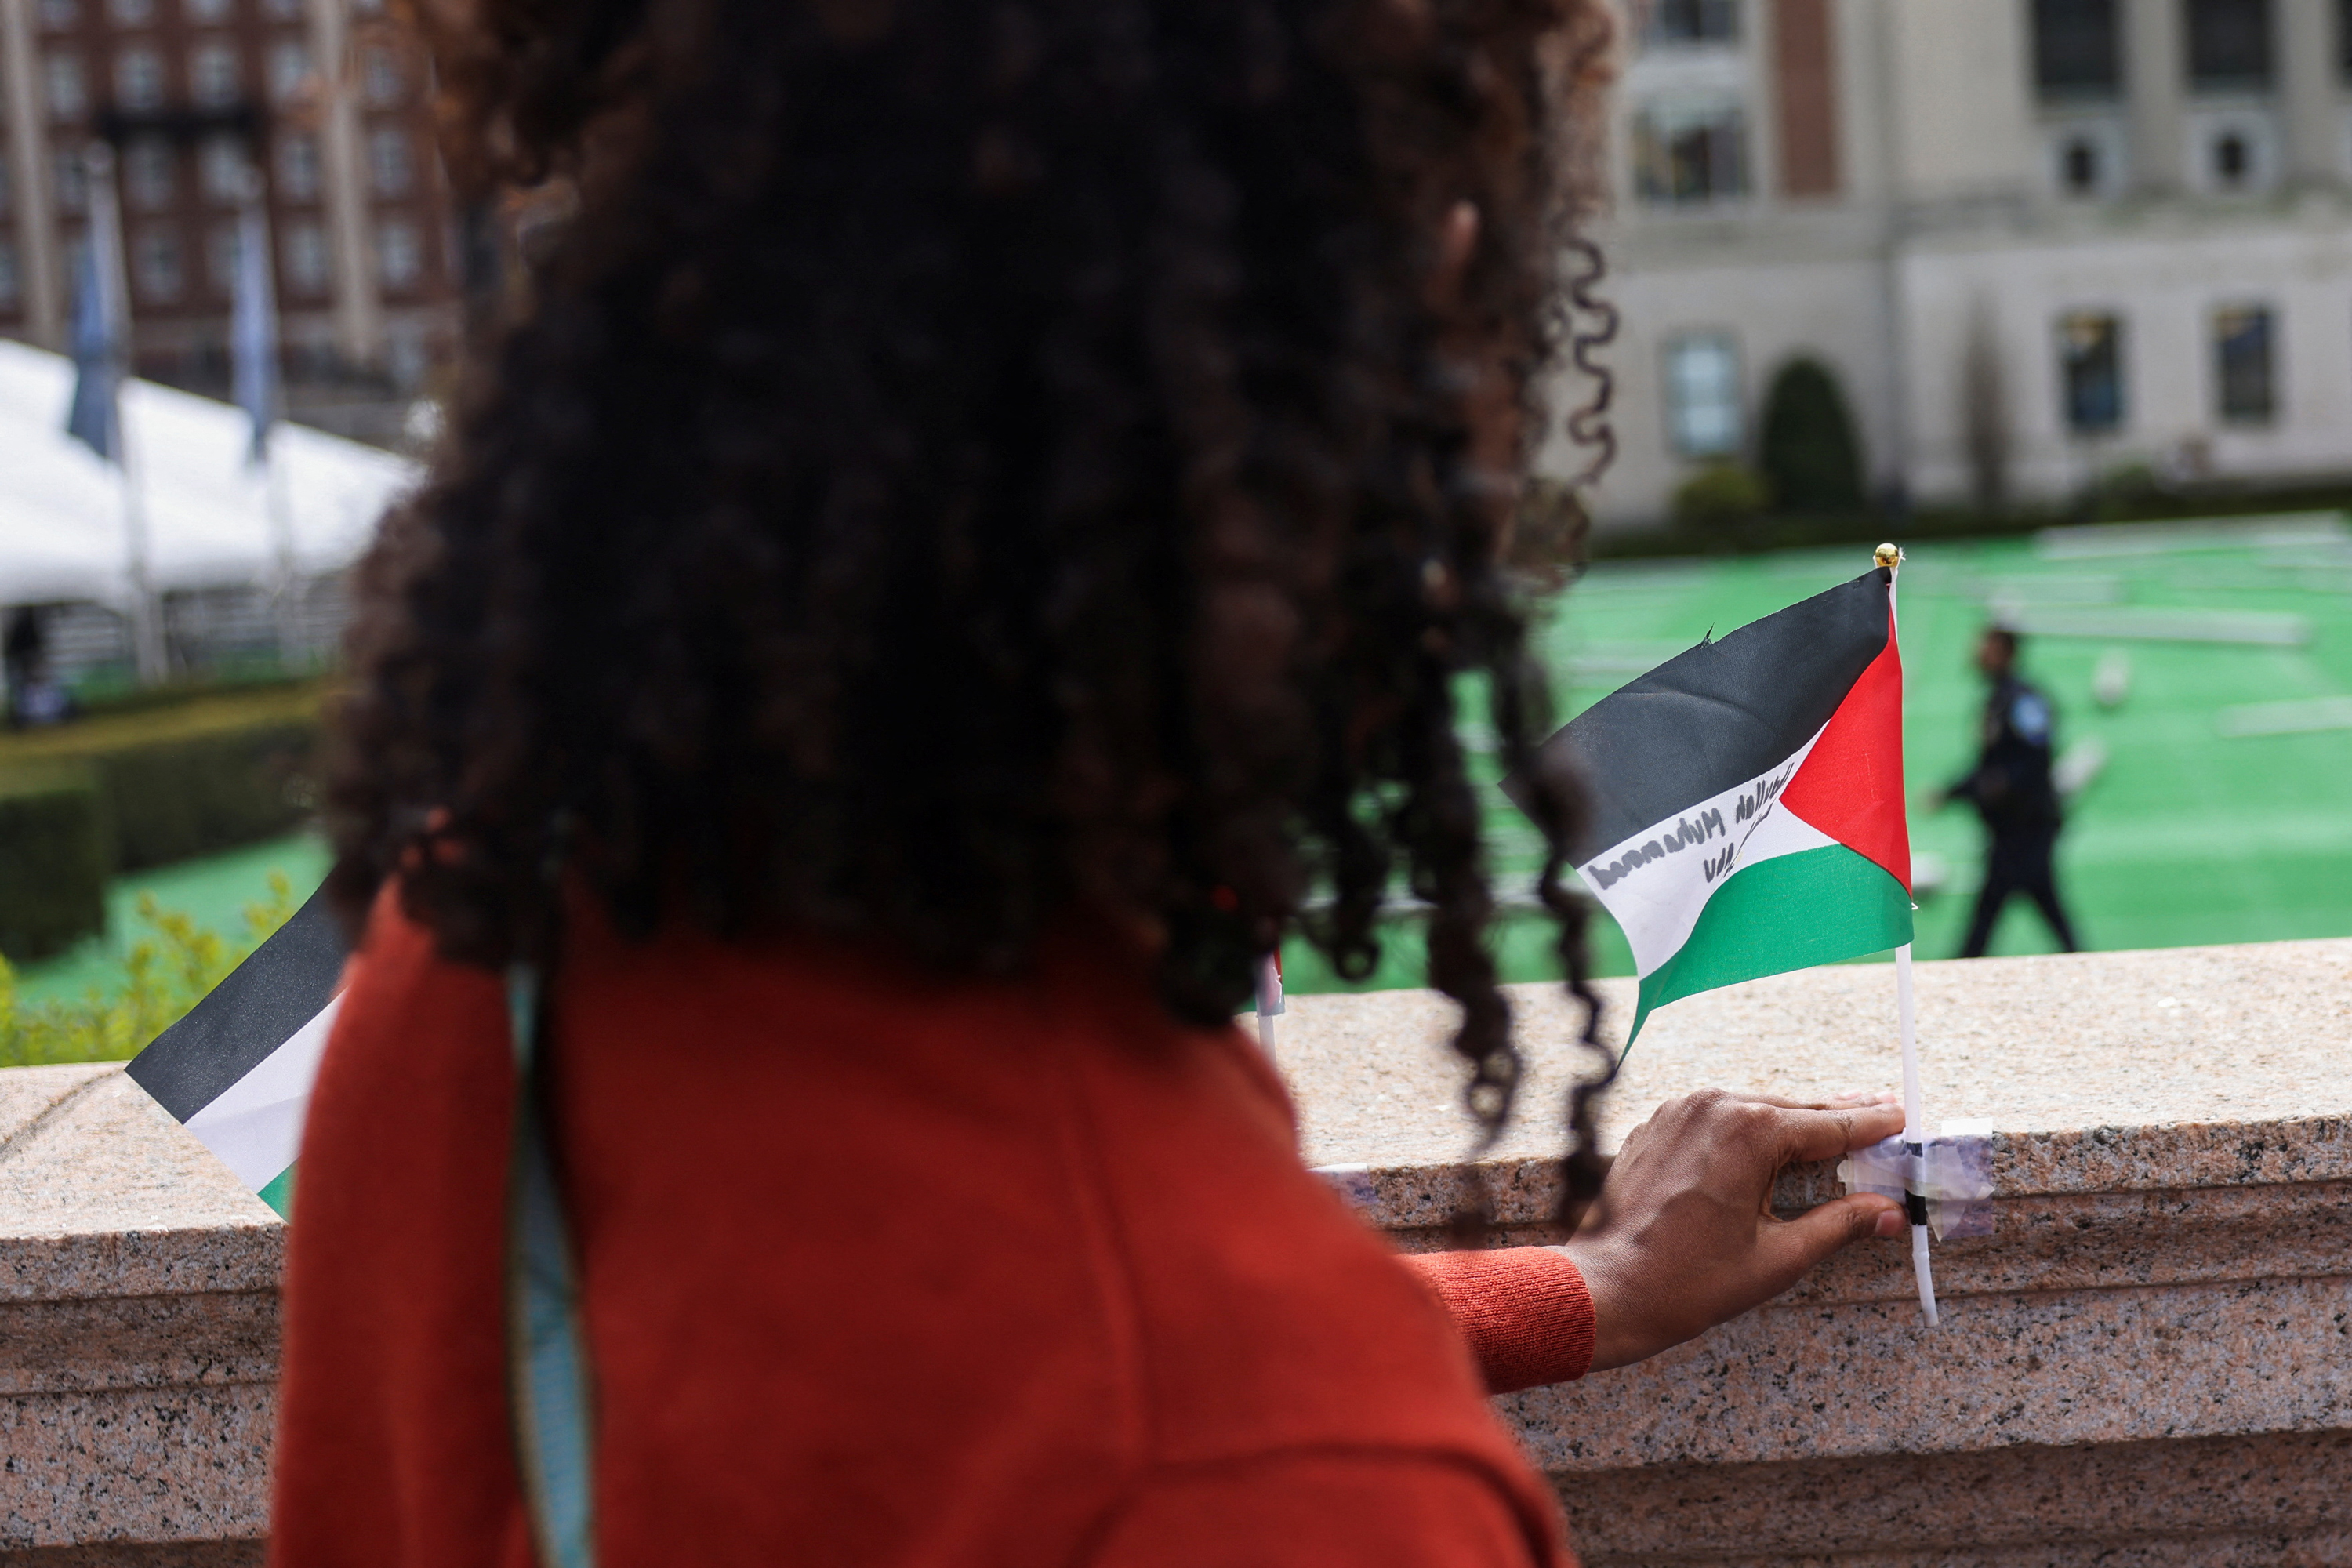 A student secures a Palestinian flag near a protest encampment on the main campus of Columbia University in New York City on April 27.